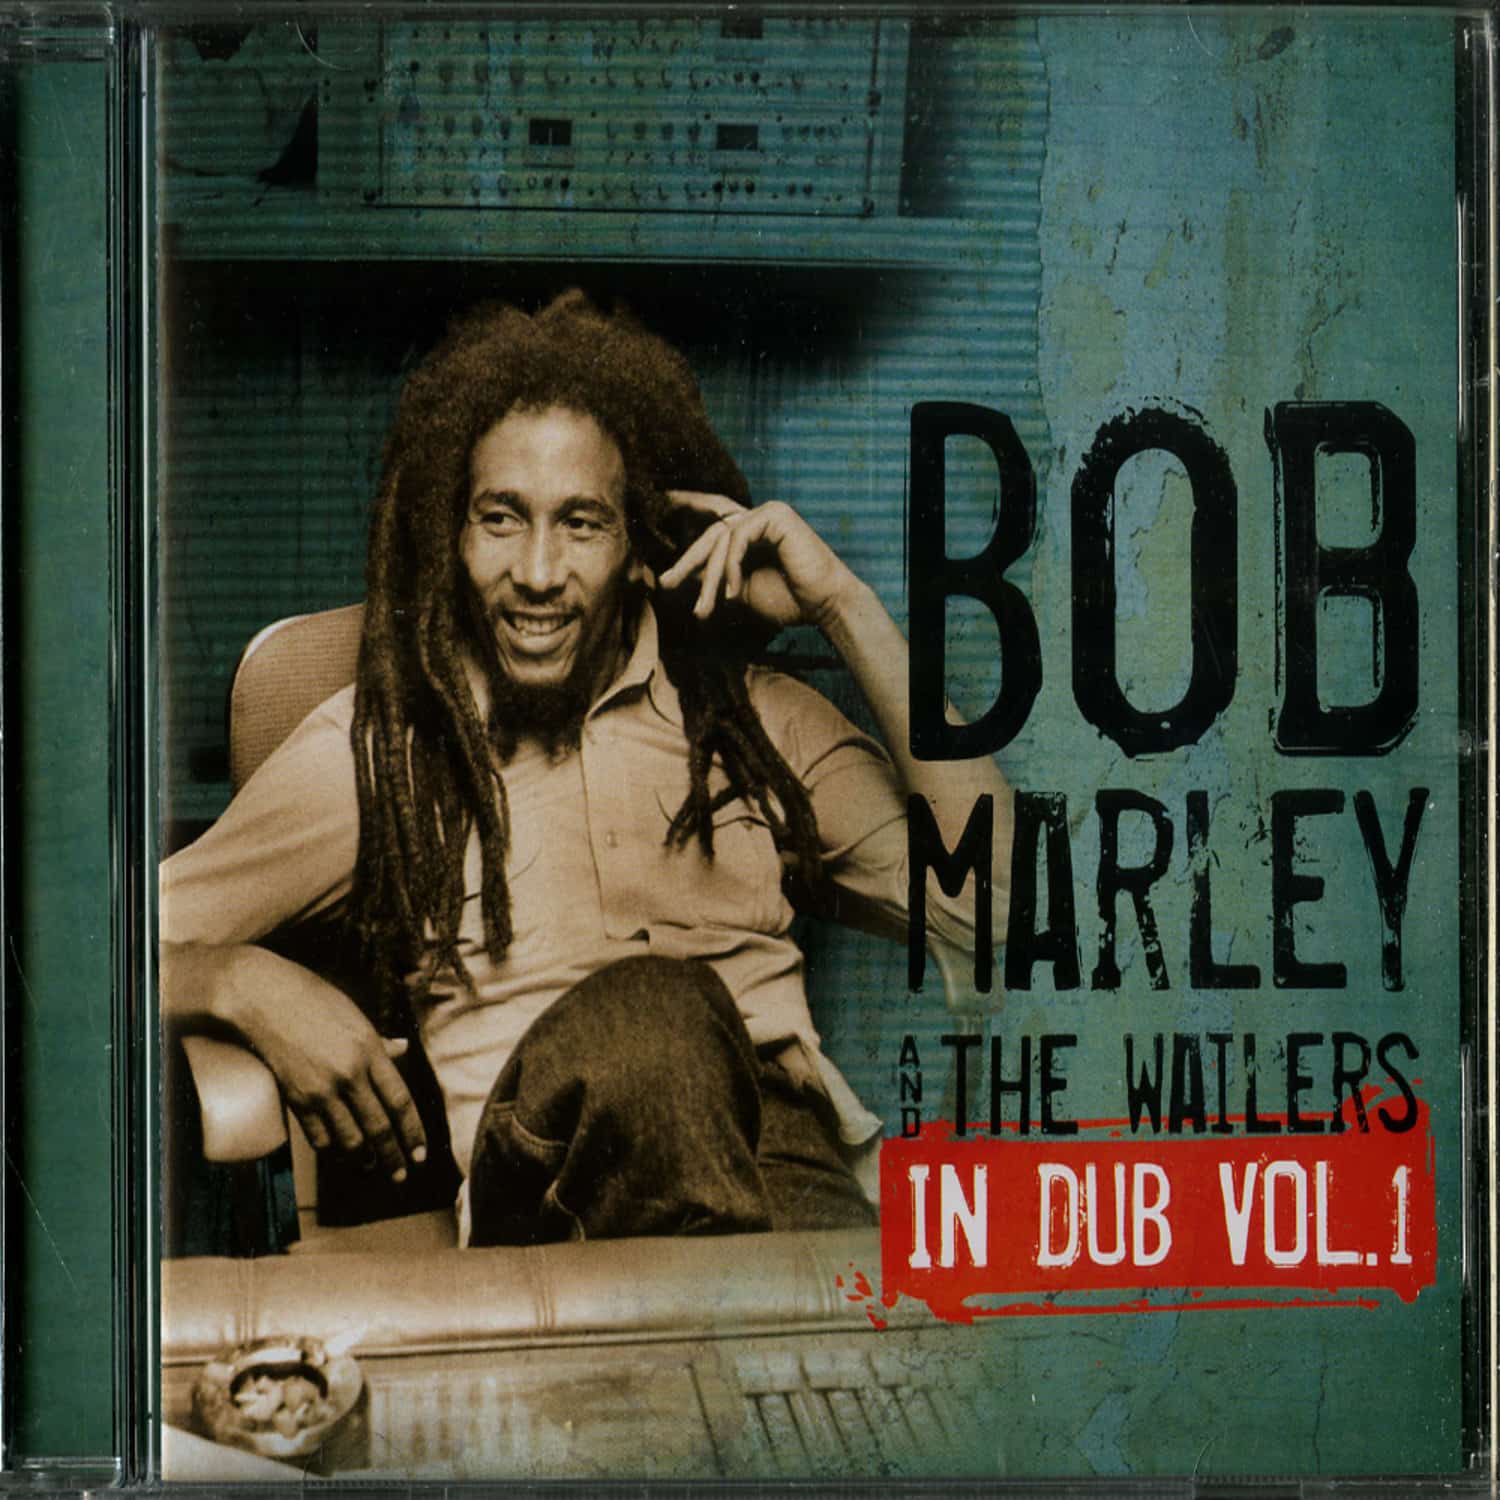 Bob Marley and The Wailers - IN DUB VOL. 1 